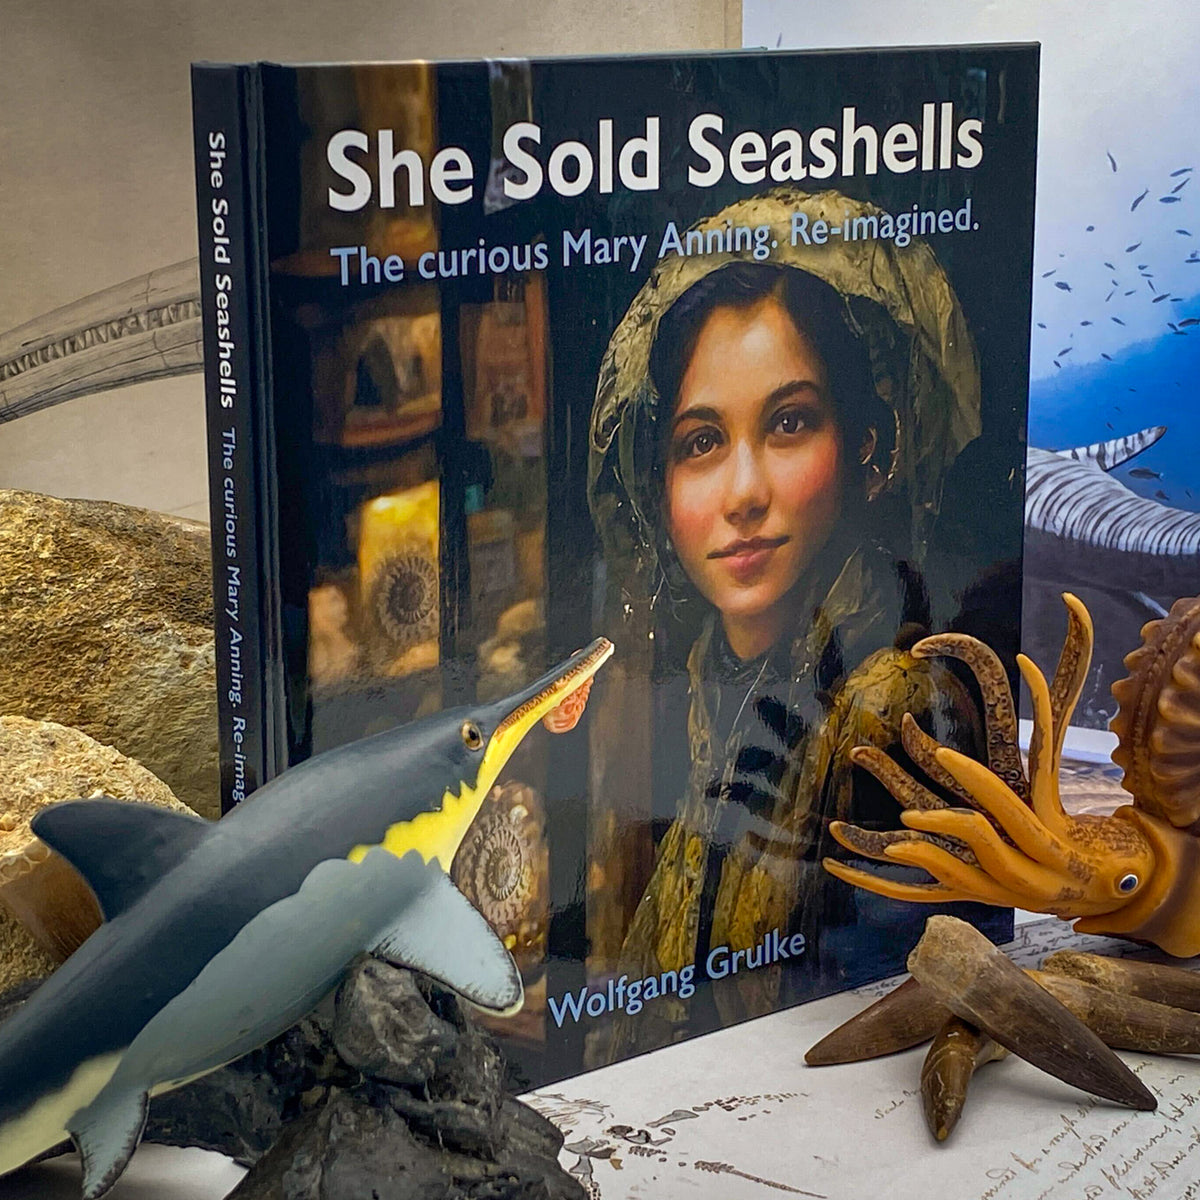 The Story Behind the Seashells By the Seashore